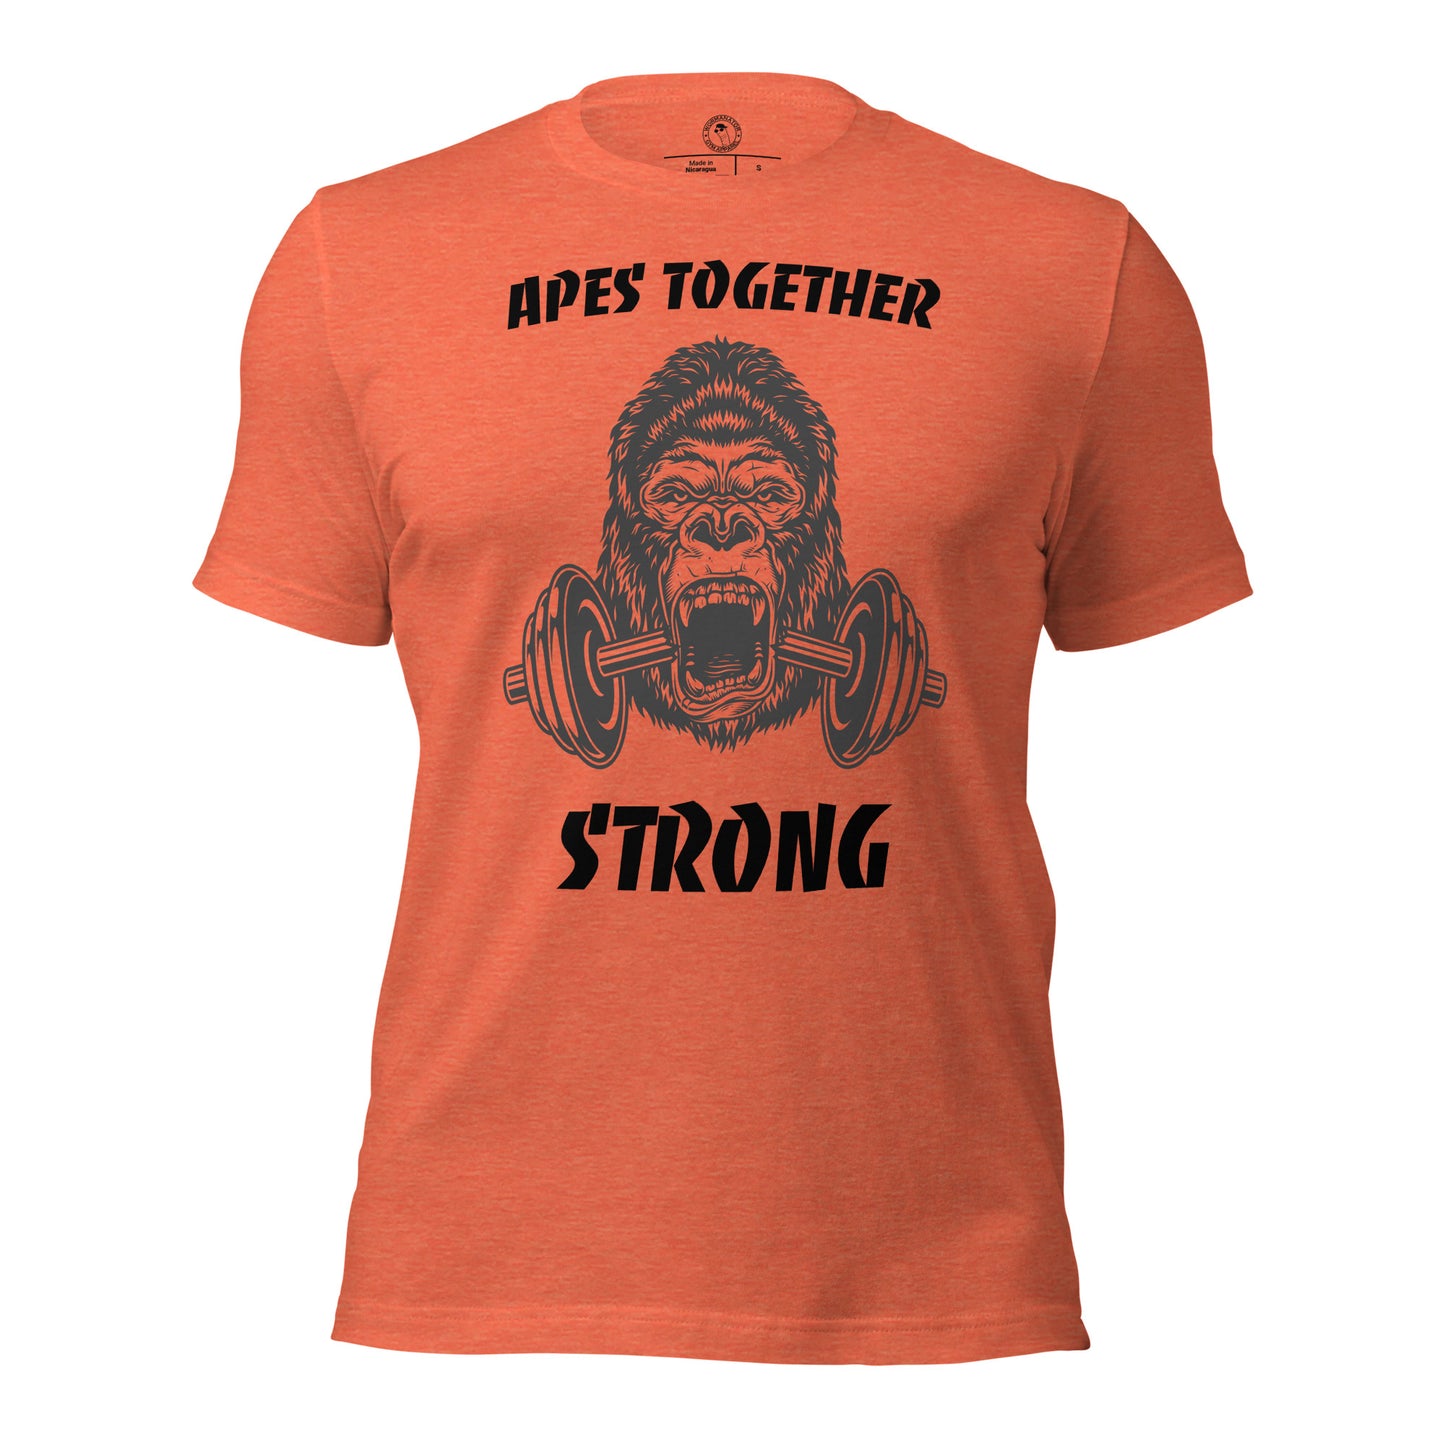 Apes Together Strong Shirt in Heather Orange